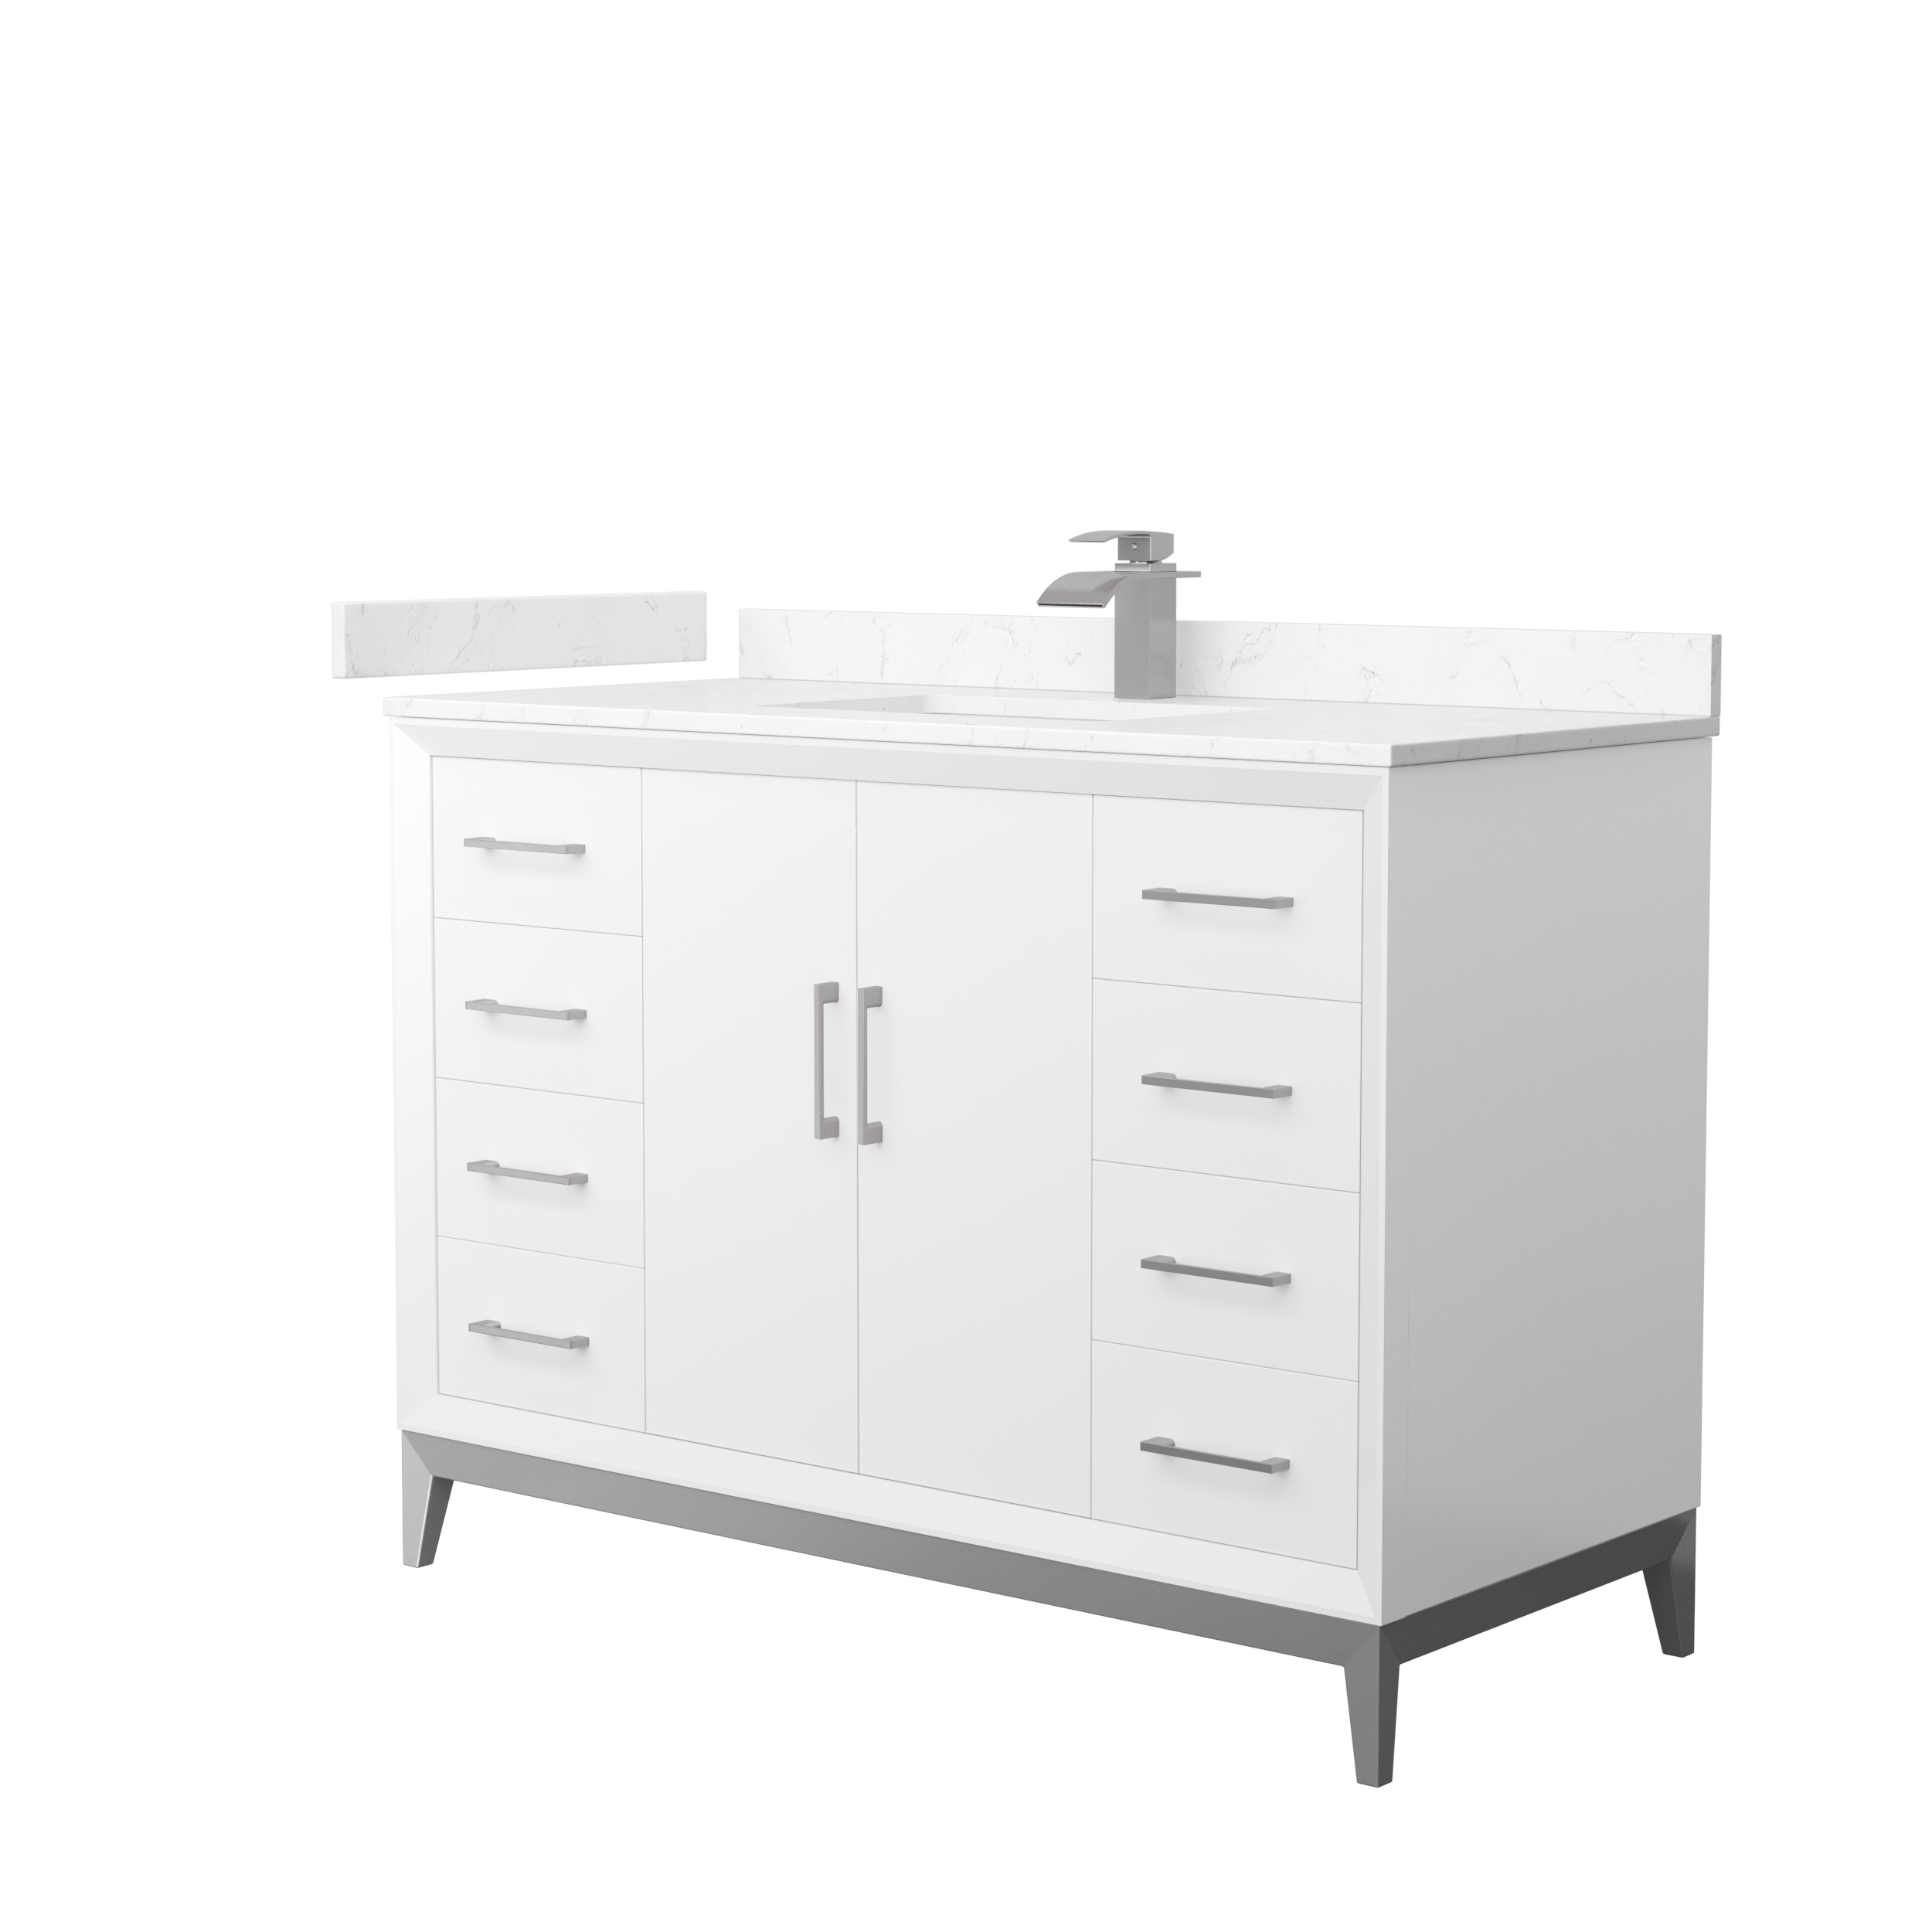 Amici 48" Single Vanity with optional Cultured Marble Counter - White WC-8181-48-SGL-VAN-WHT-